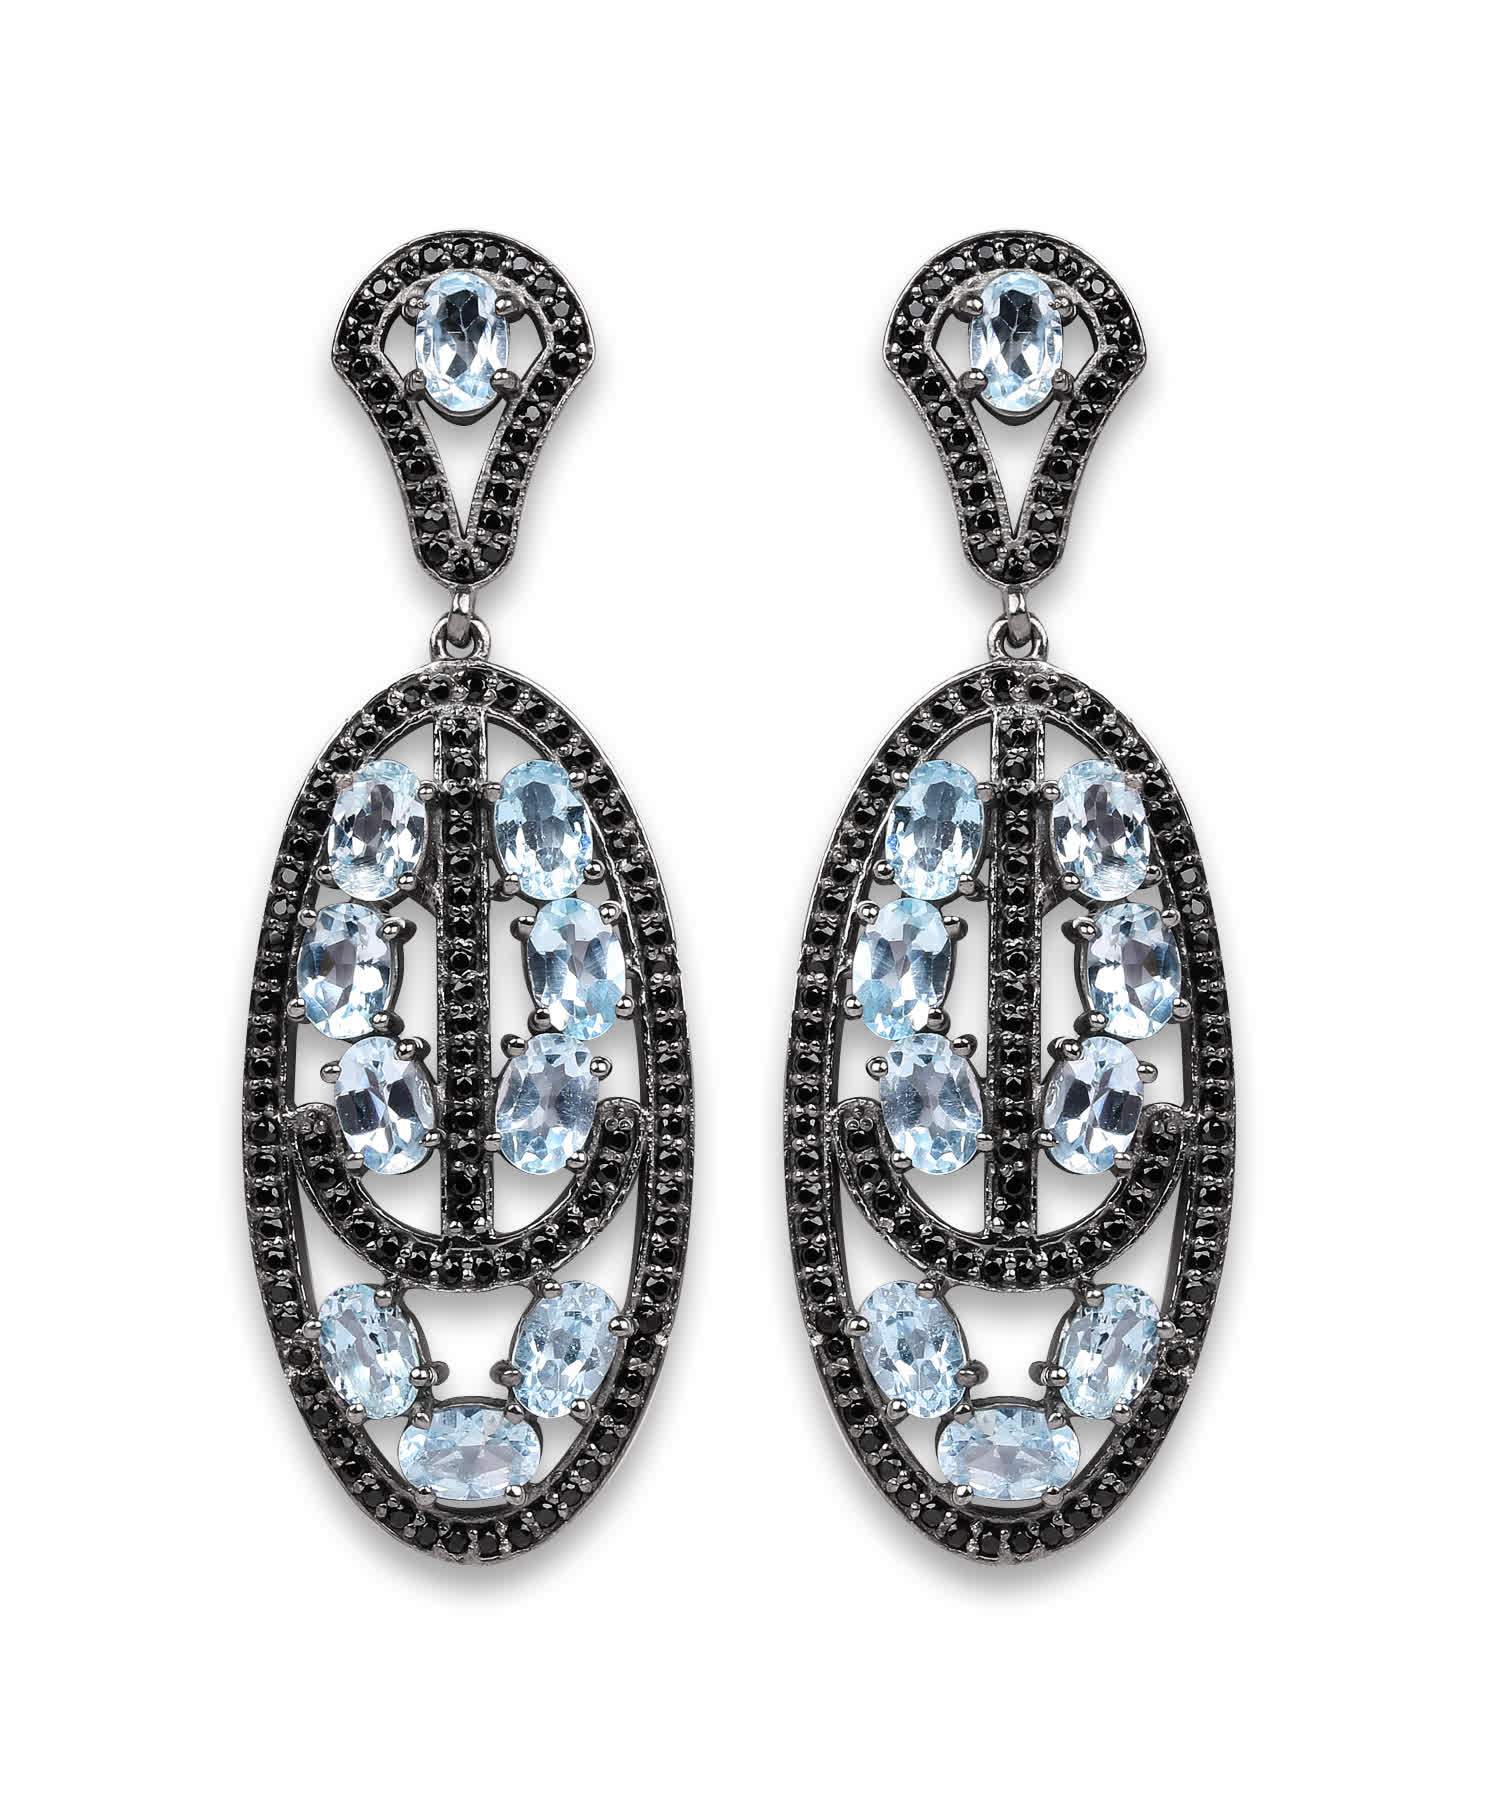 13.80ctw Natural Sky Blue Topaz and Black Spinel Rhodium Plated 925 Sterling Silver Antique Style Dangle Earrings View 1